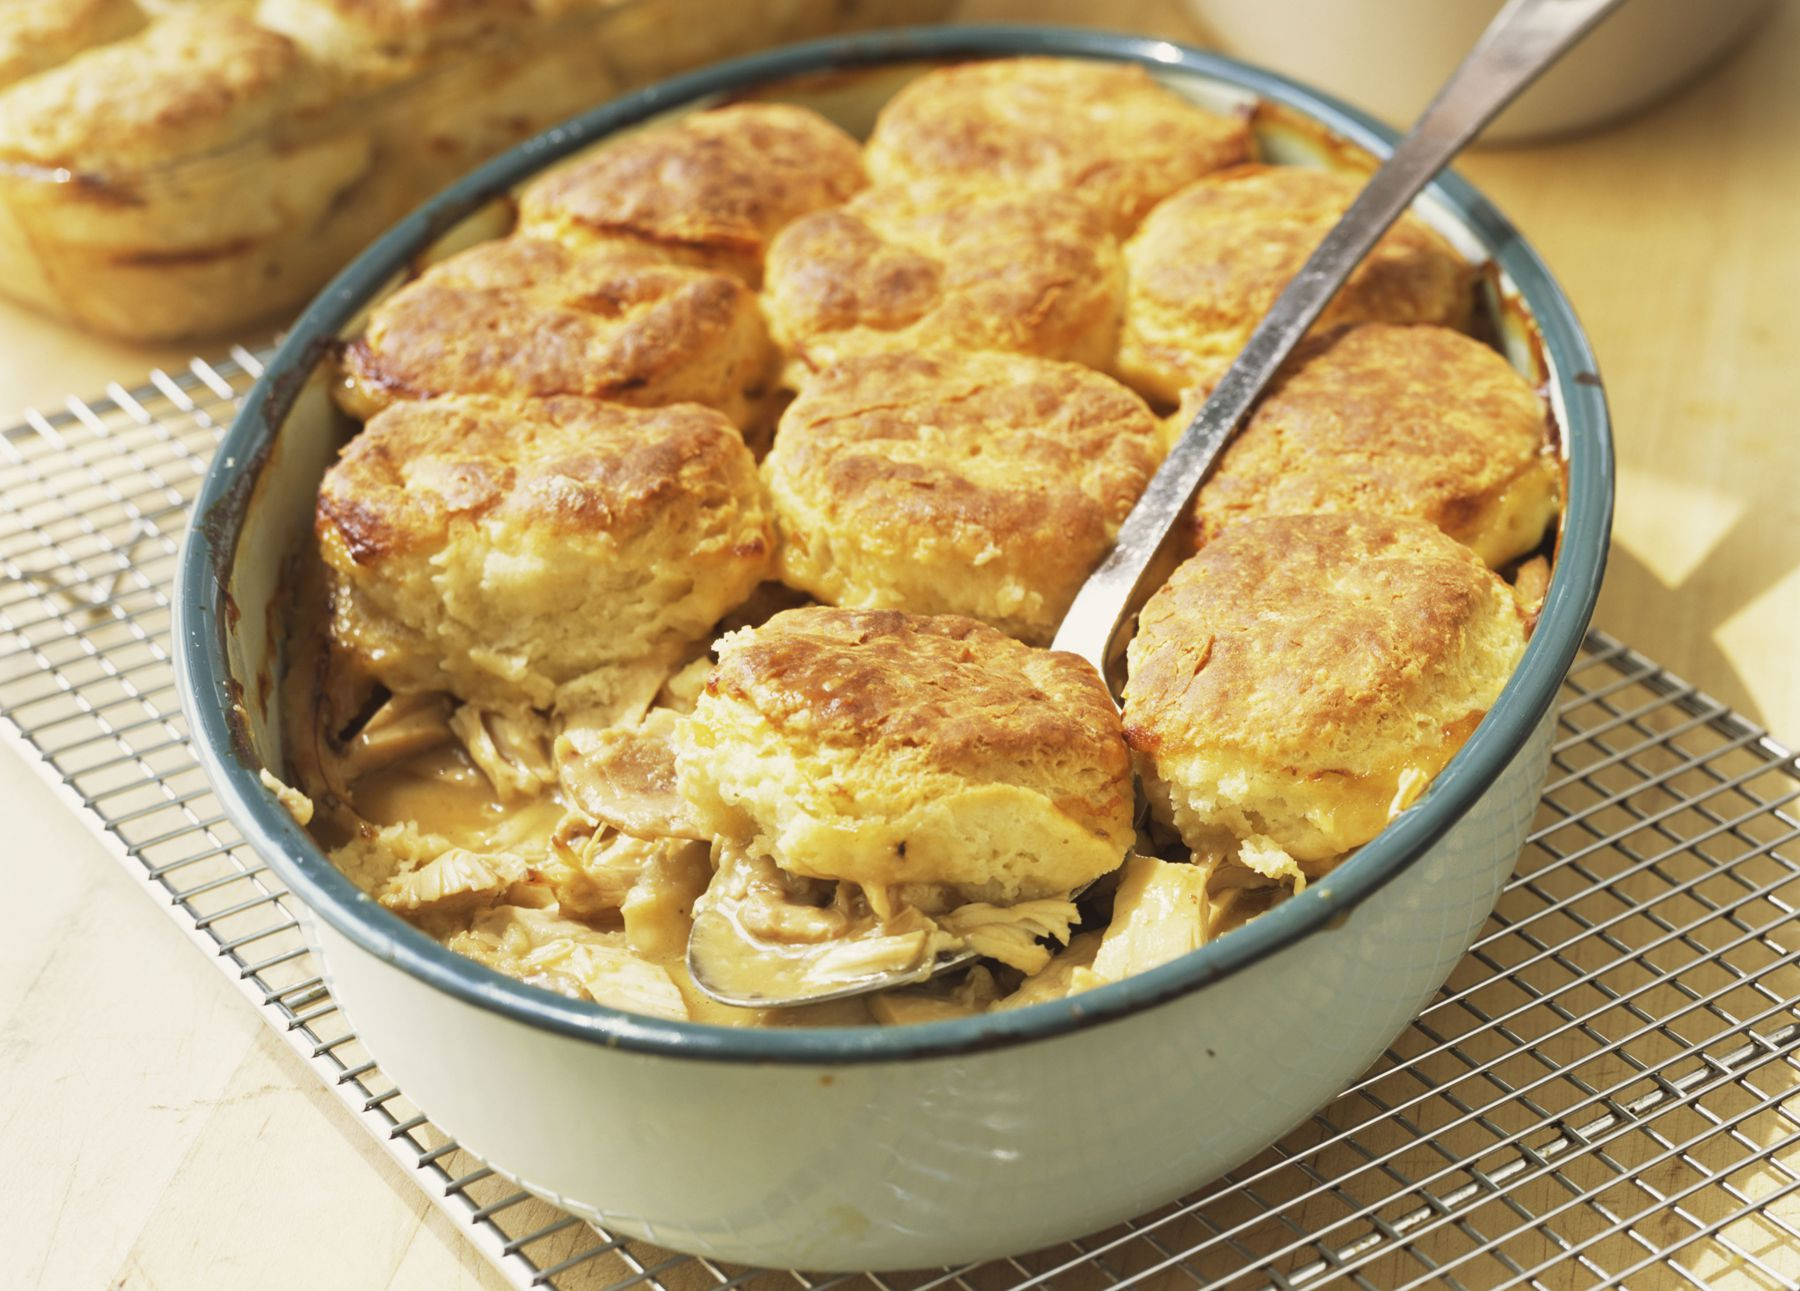 Biscuit Casserole Recipes
 Fast and Easy Chicken and Biscuit Casserole Recipe